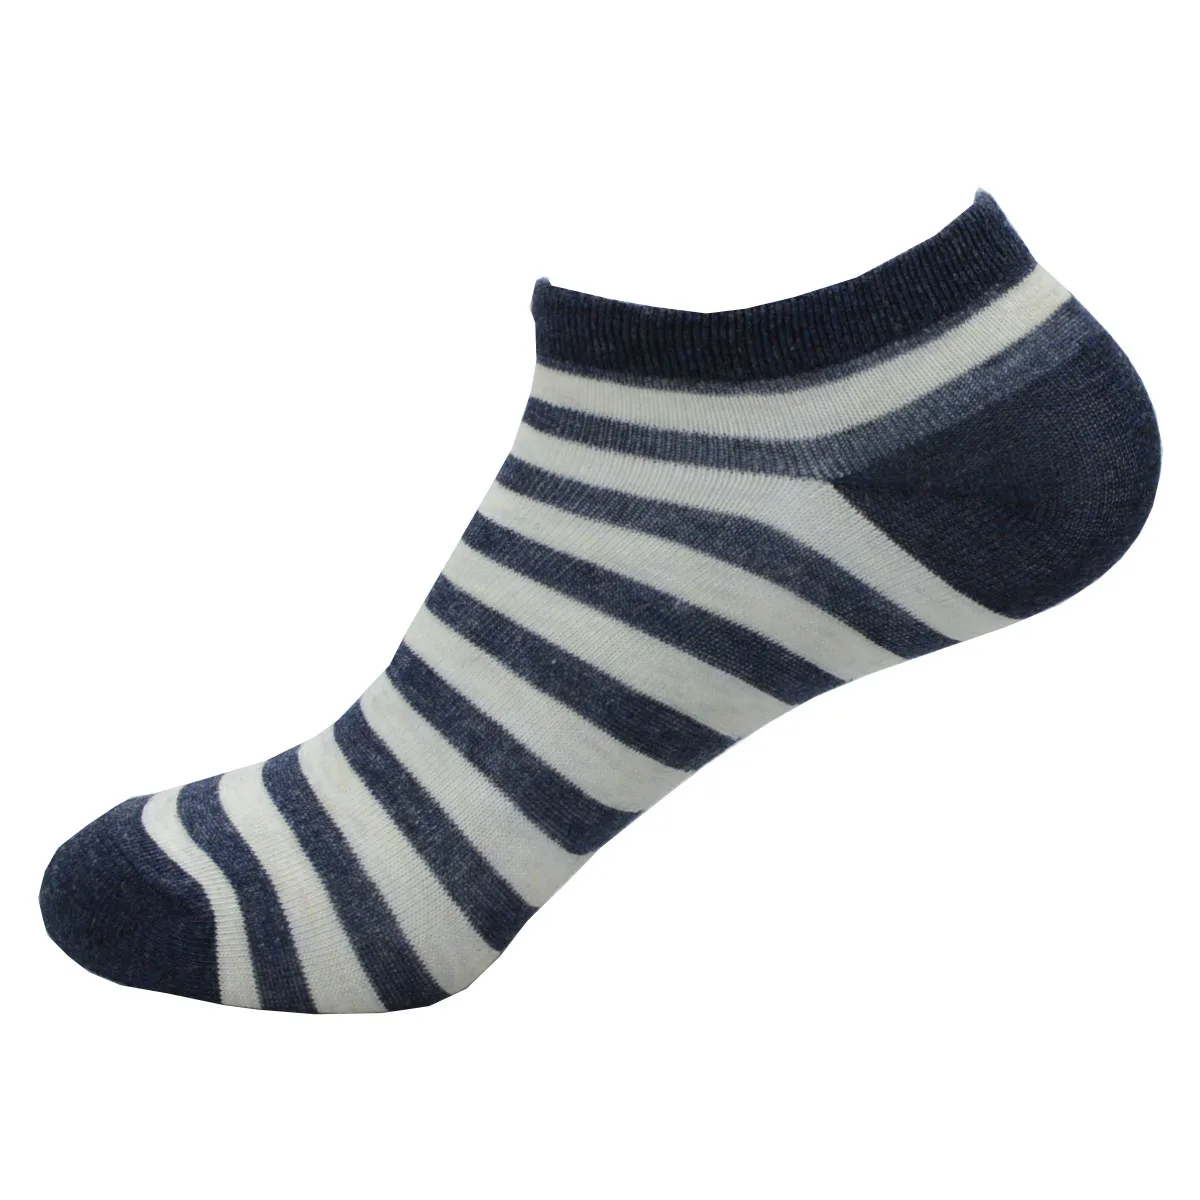 5 pairs High Quality Adult Cotton Business Crew Casual Men Socks Summer Spring Short Male Navy Happy Socks Boys Meias Sox images - 6